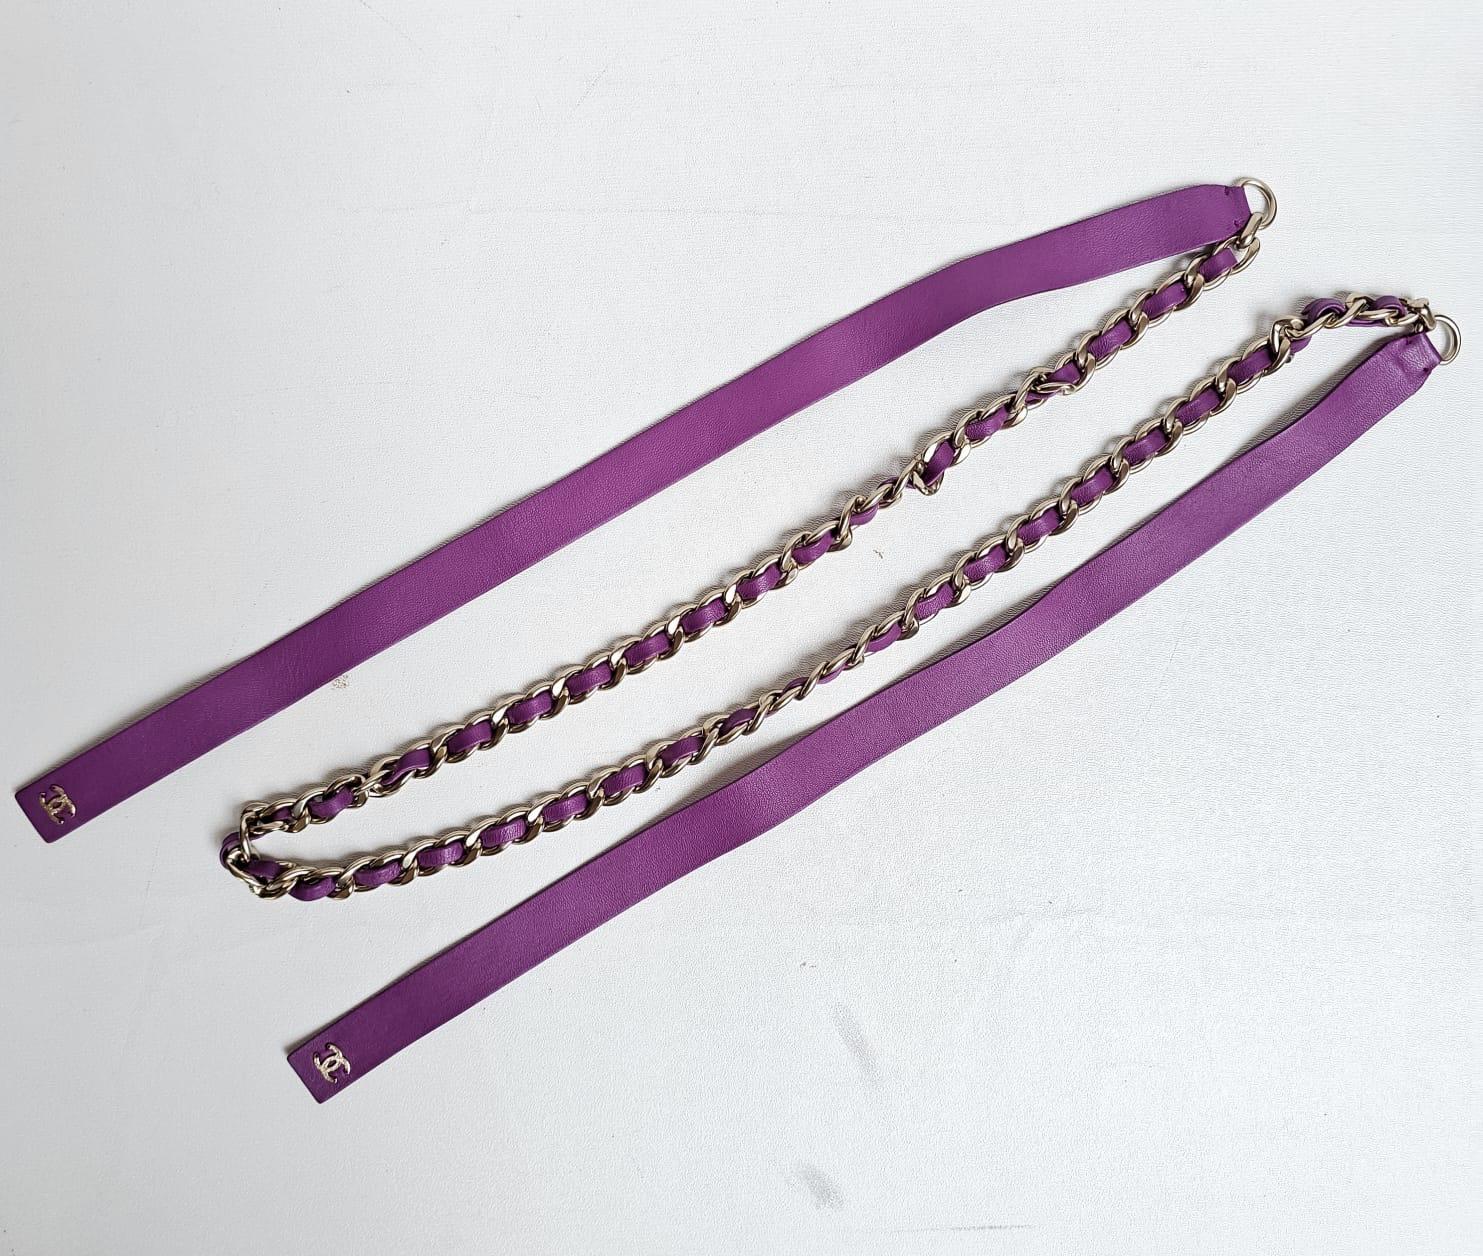 Chanel Lilac Bow Leather Chain Entwined Waist Belt In Excellent Condition For Sale In Jakarta, Daerah Khusus Ibukota Jakarta